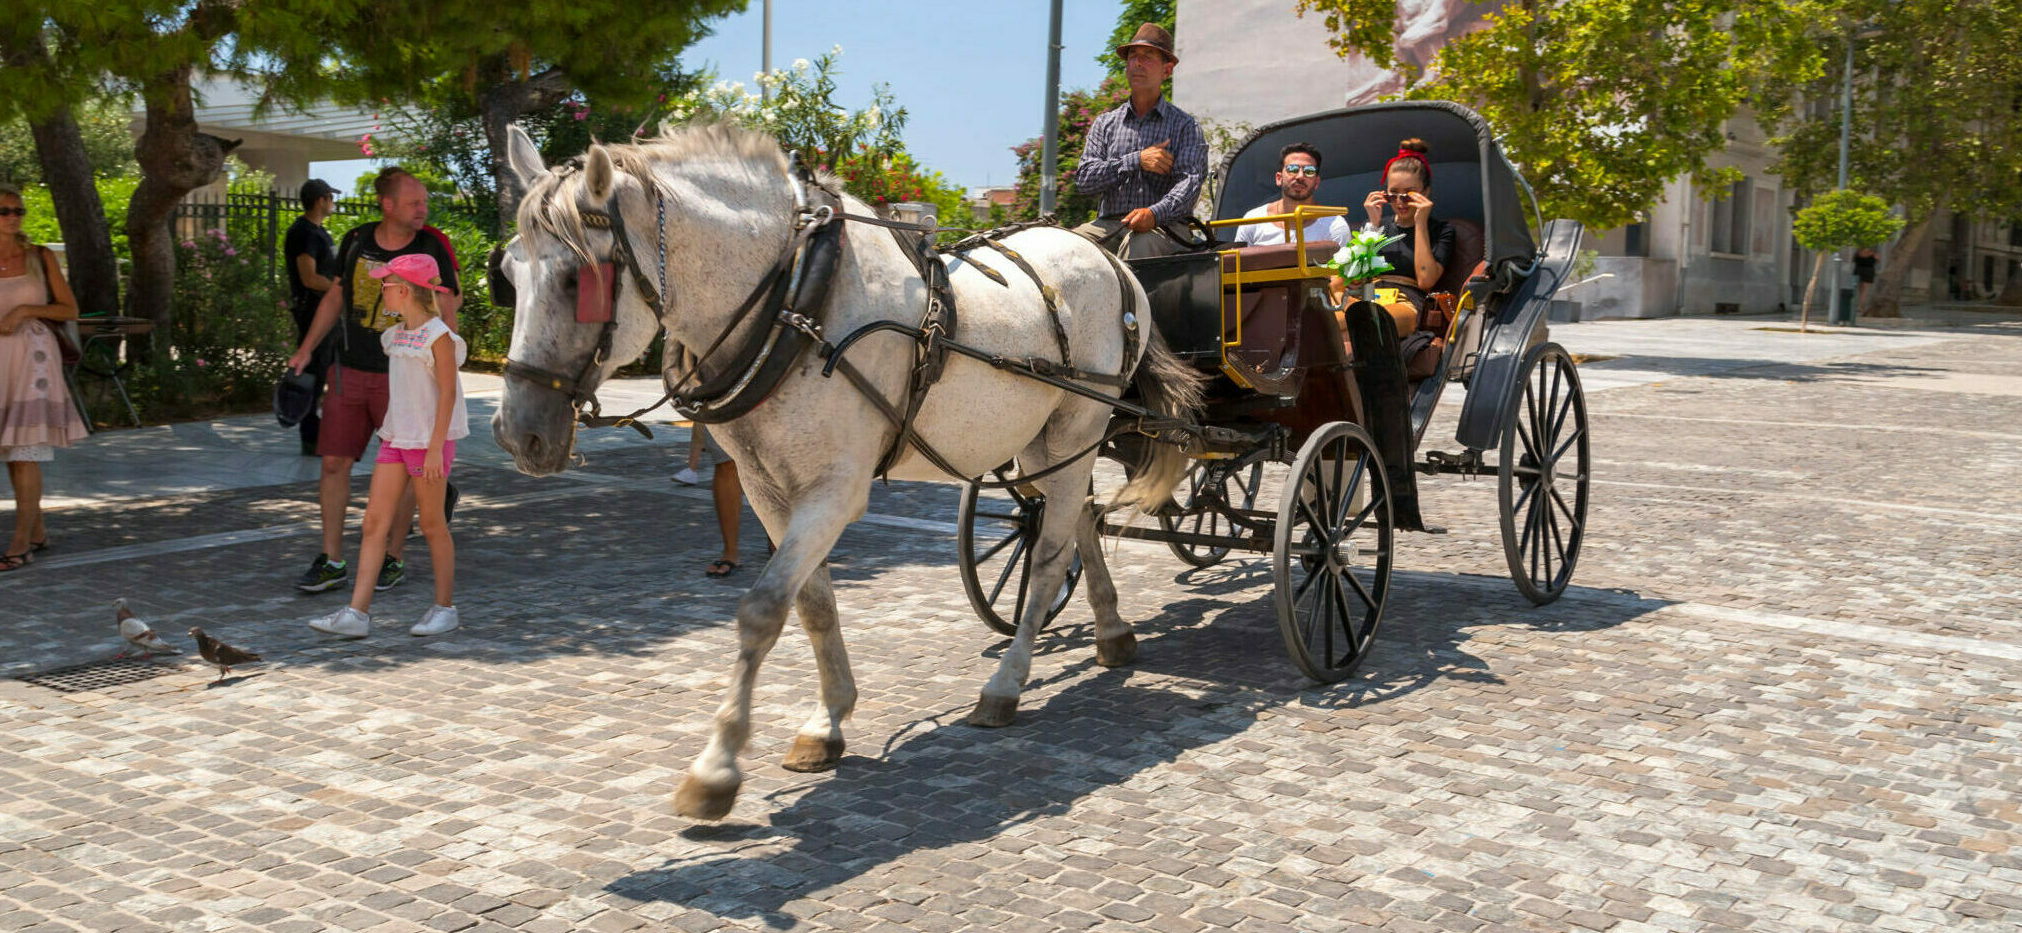 Back in time with Athens’ horse-drawn trams